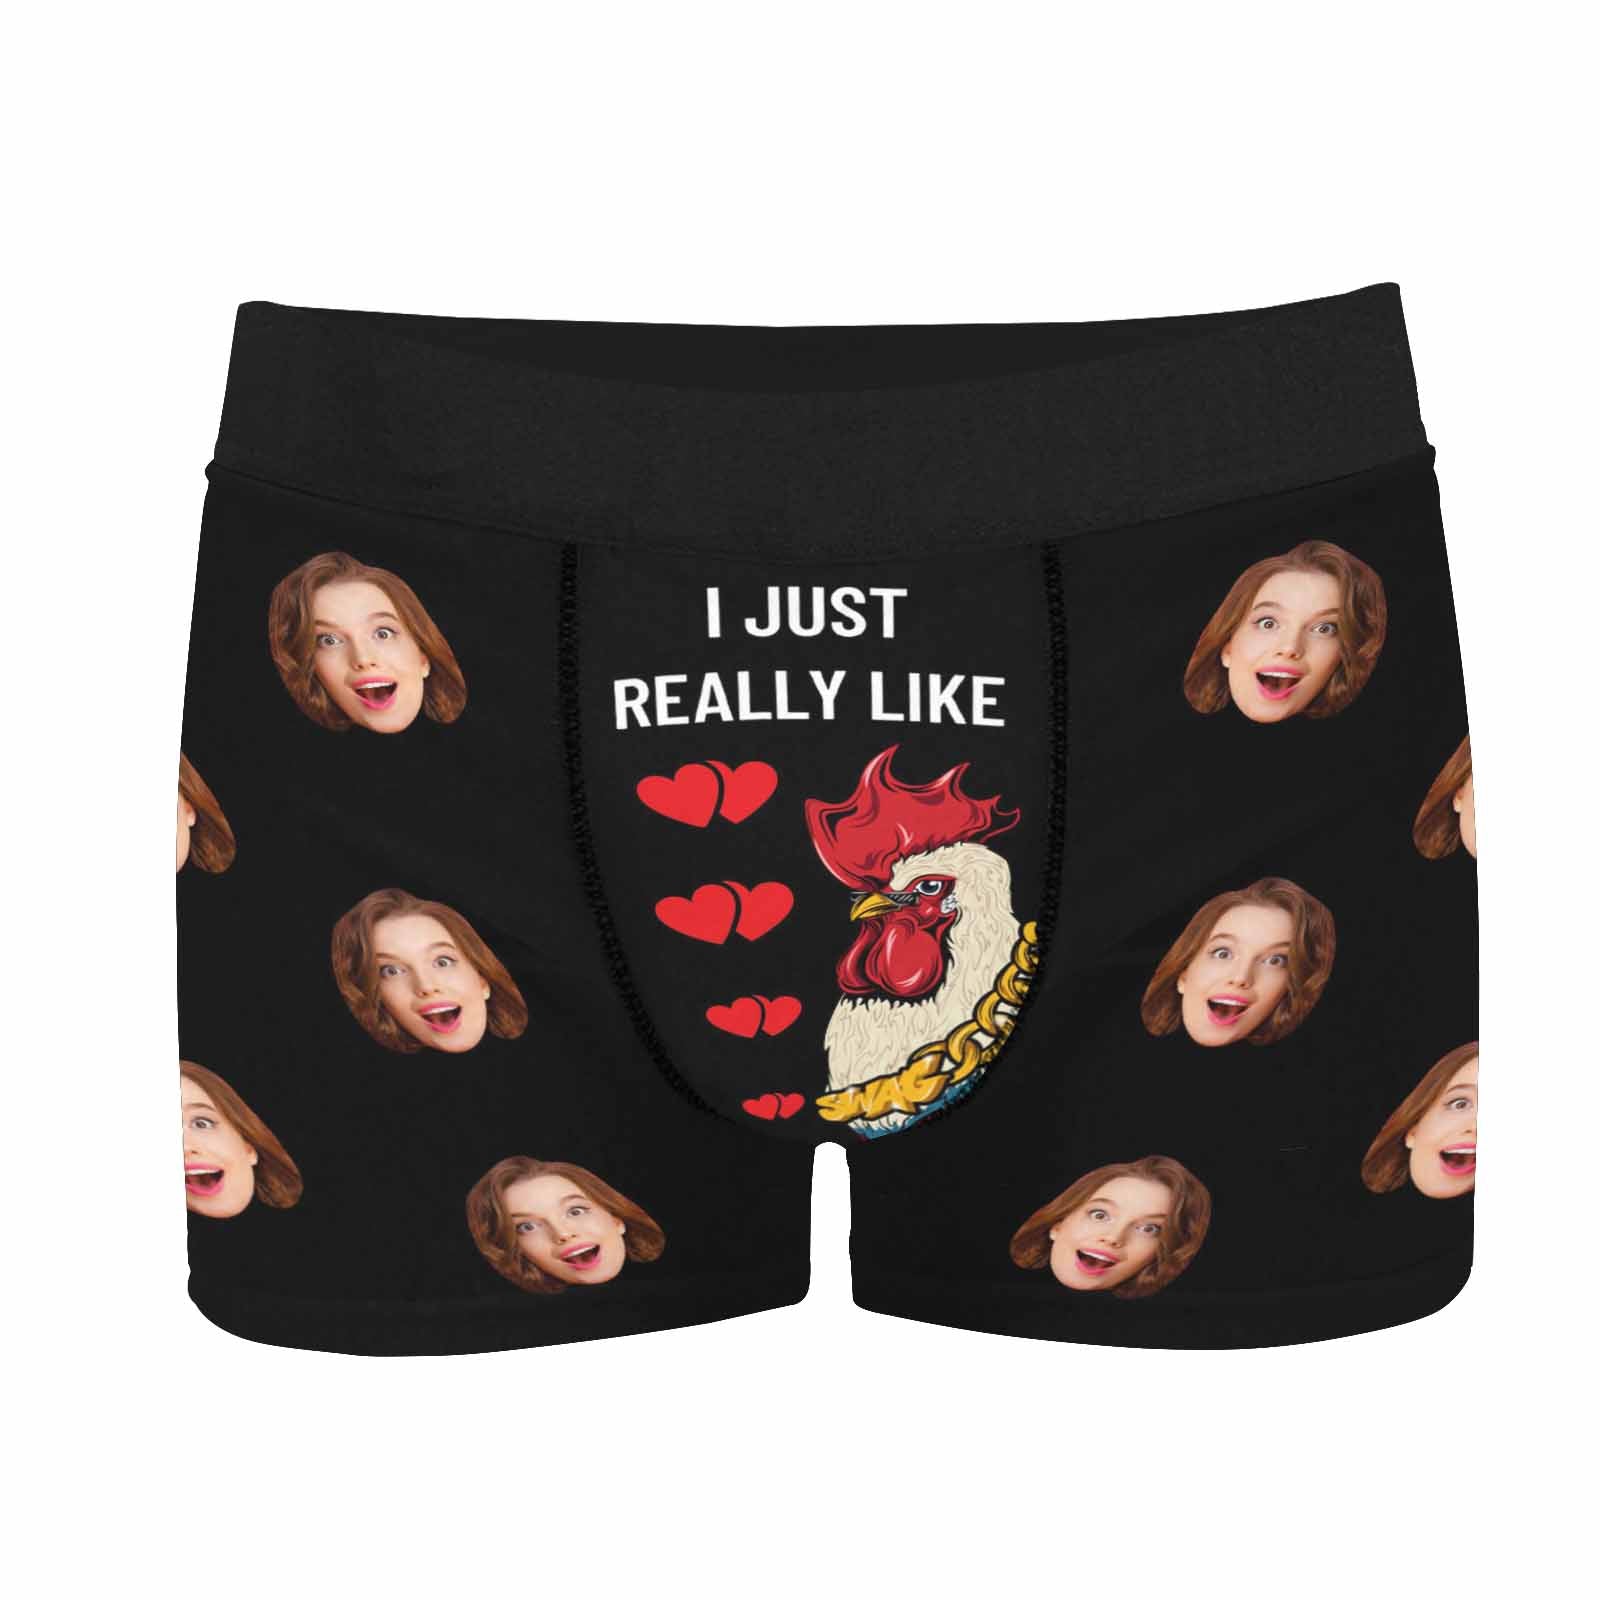 Custom Boxers for Men with Face on Novelty Boxer Briefs